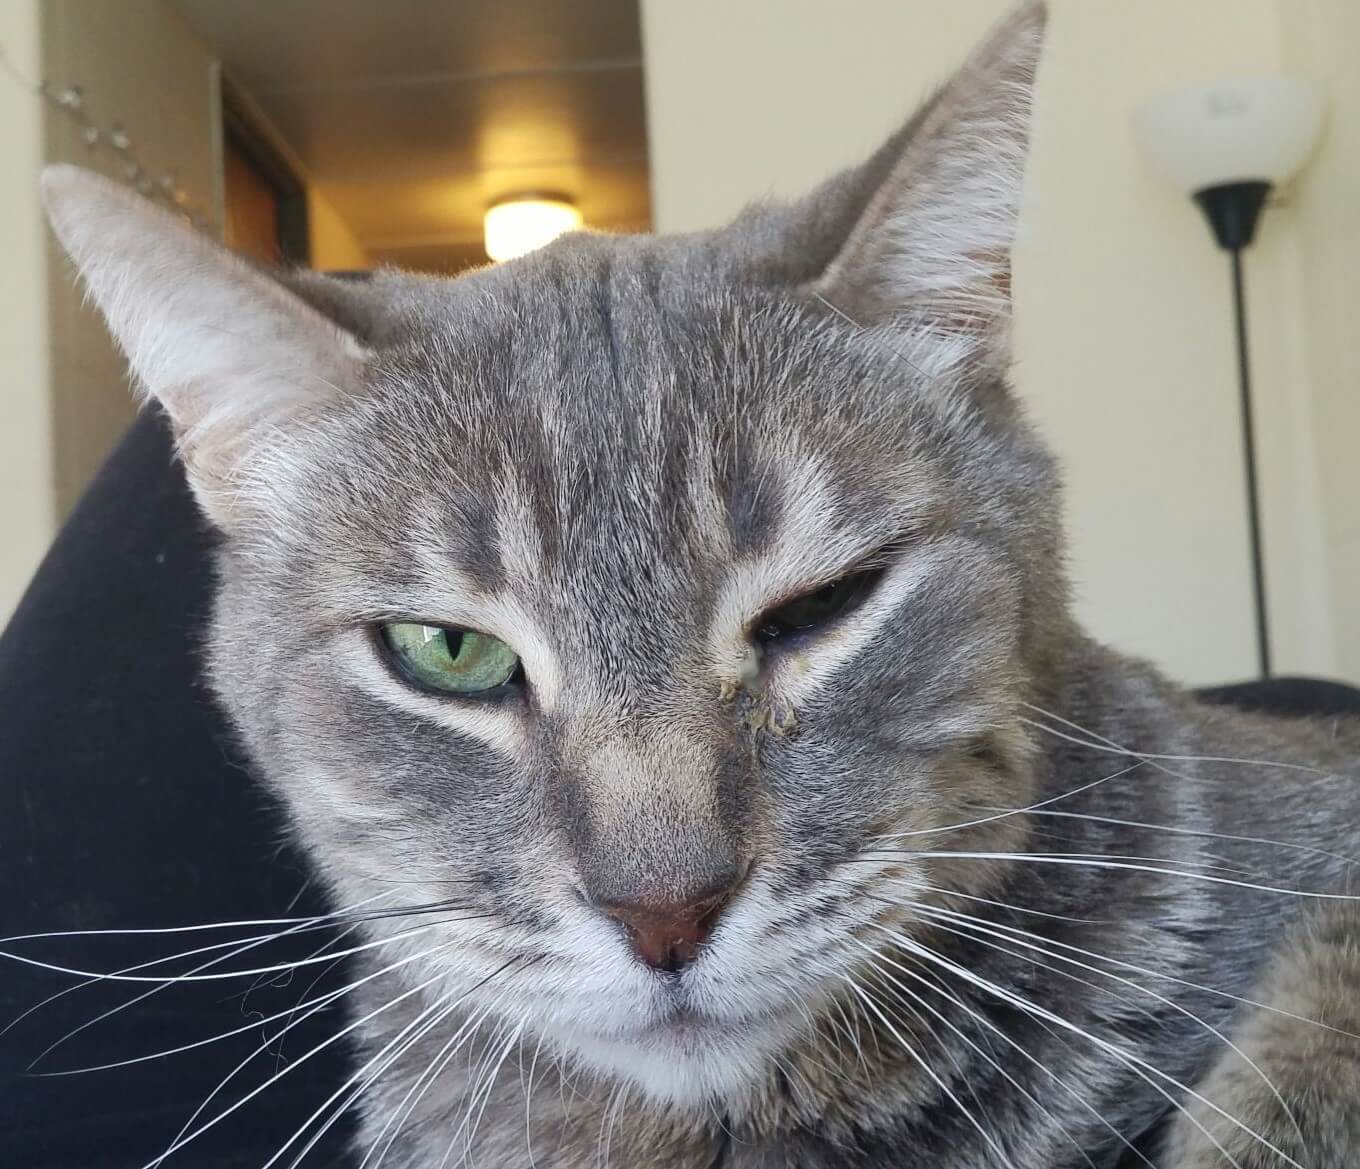 My Cat Is Squinting One Eye - What Can I Do To Help?